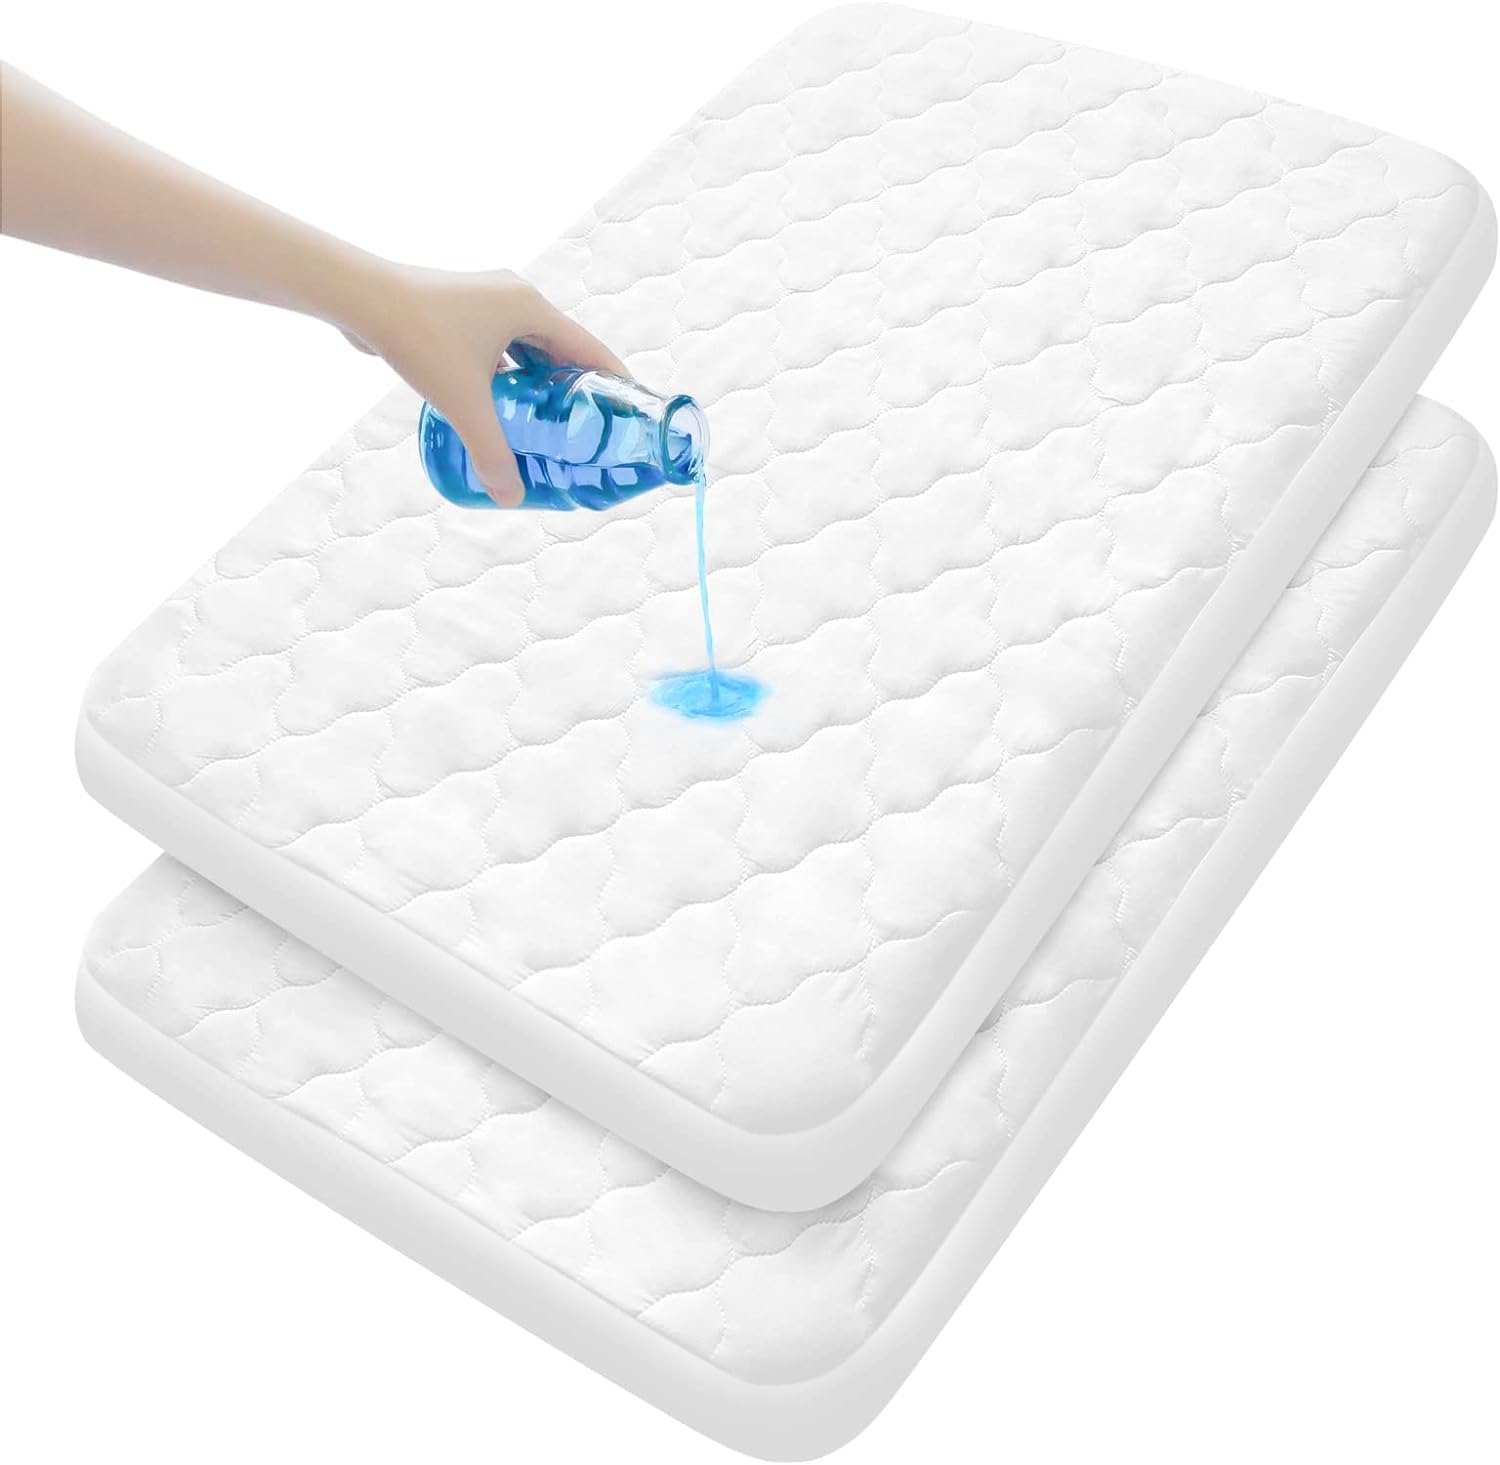 Pack N Play Mattress Pad Cover/ Protector - 2 Pack, Ultra-Soft Microfiber, Waterproof, White (for Standard Playpen/ Mini Crib) - Moonsea Bedding